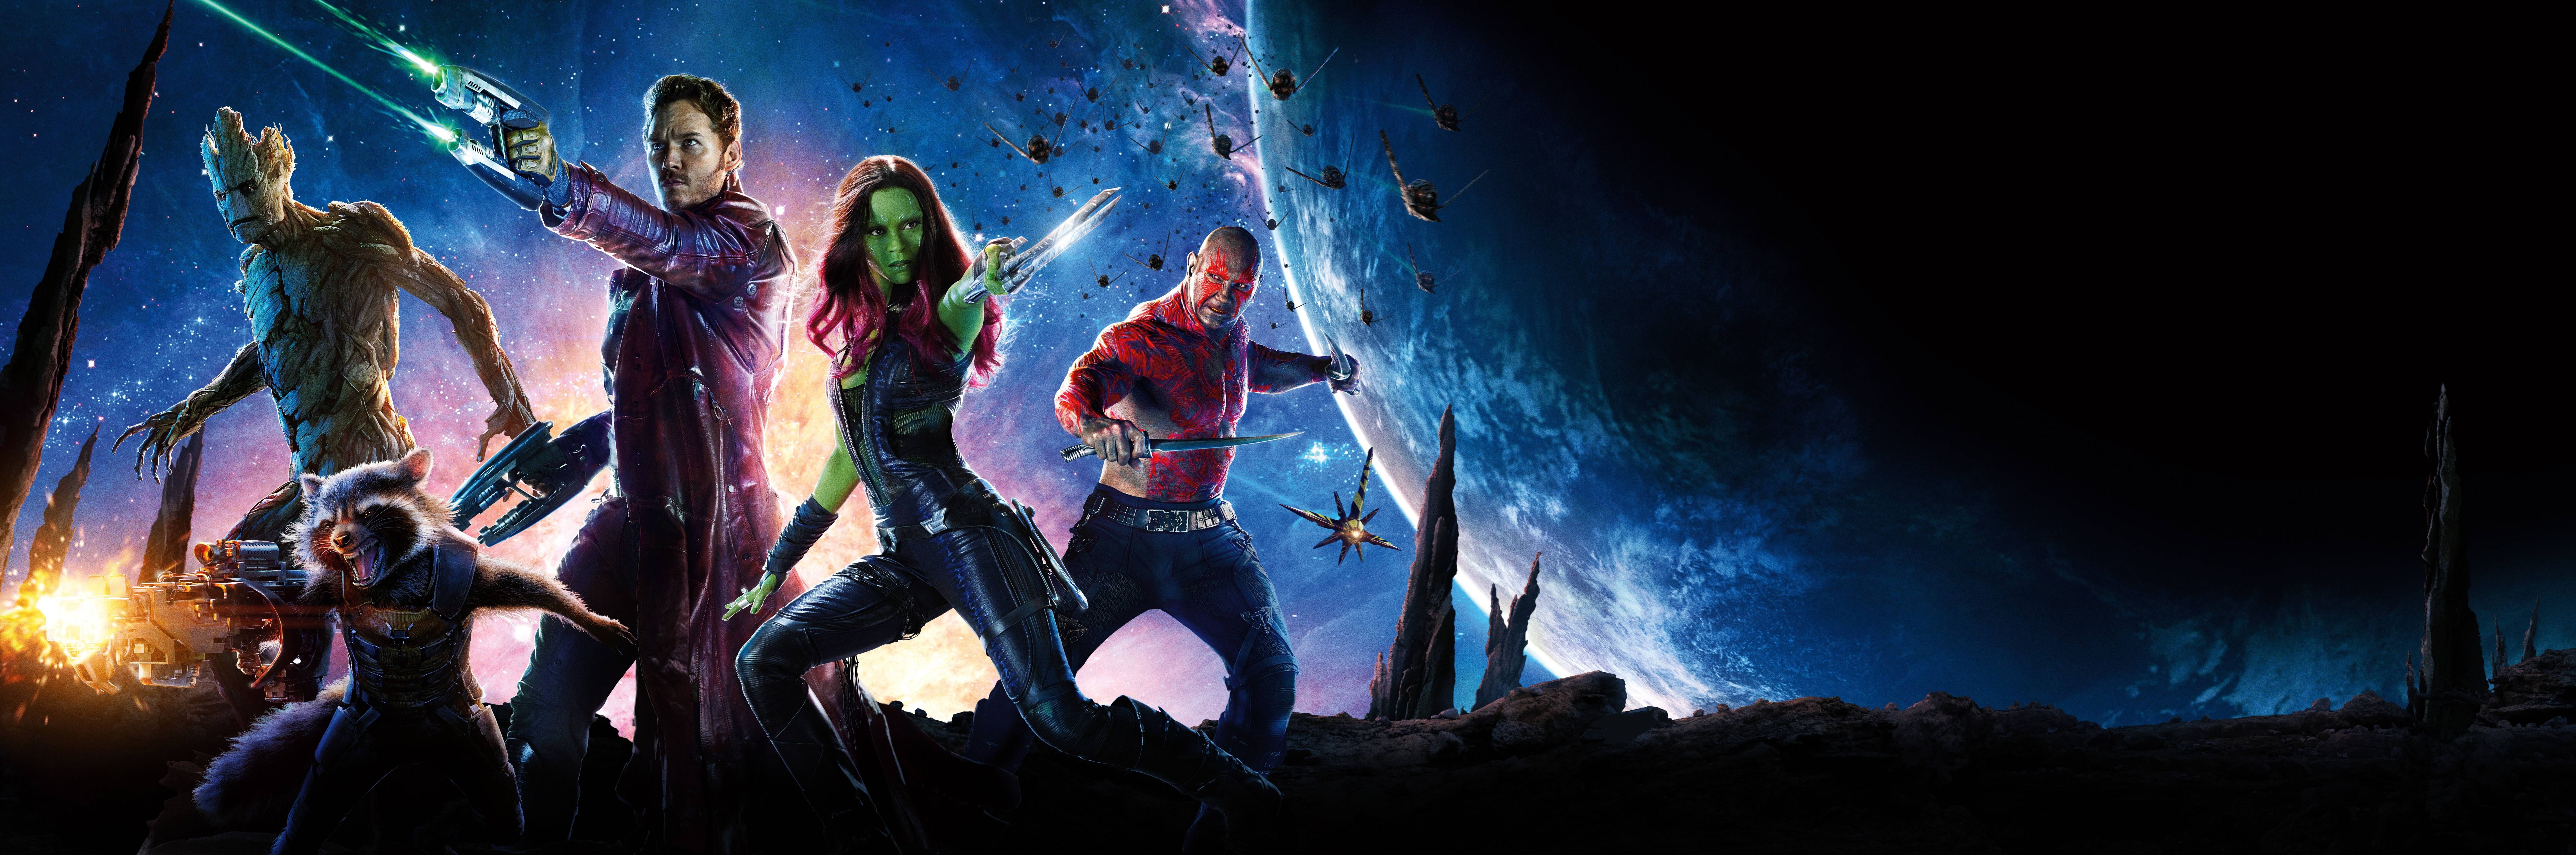 Wallpapers Guardians of the Galaxy science fiction action on the desktop